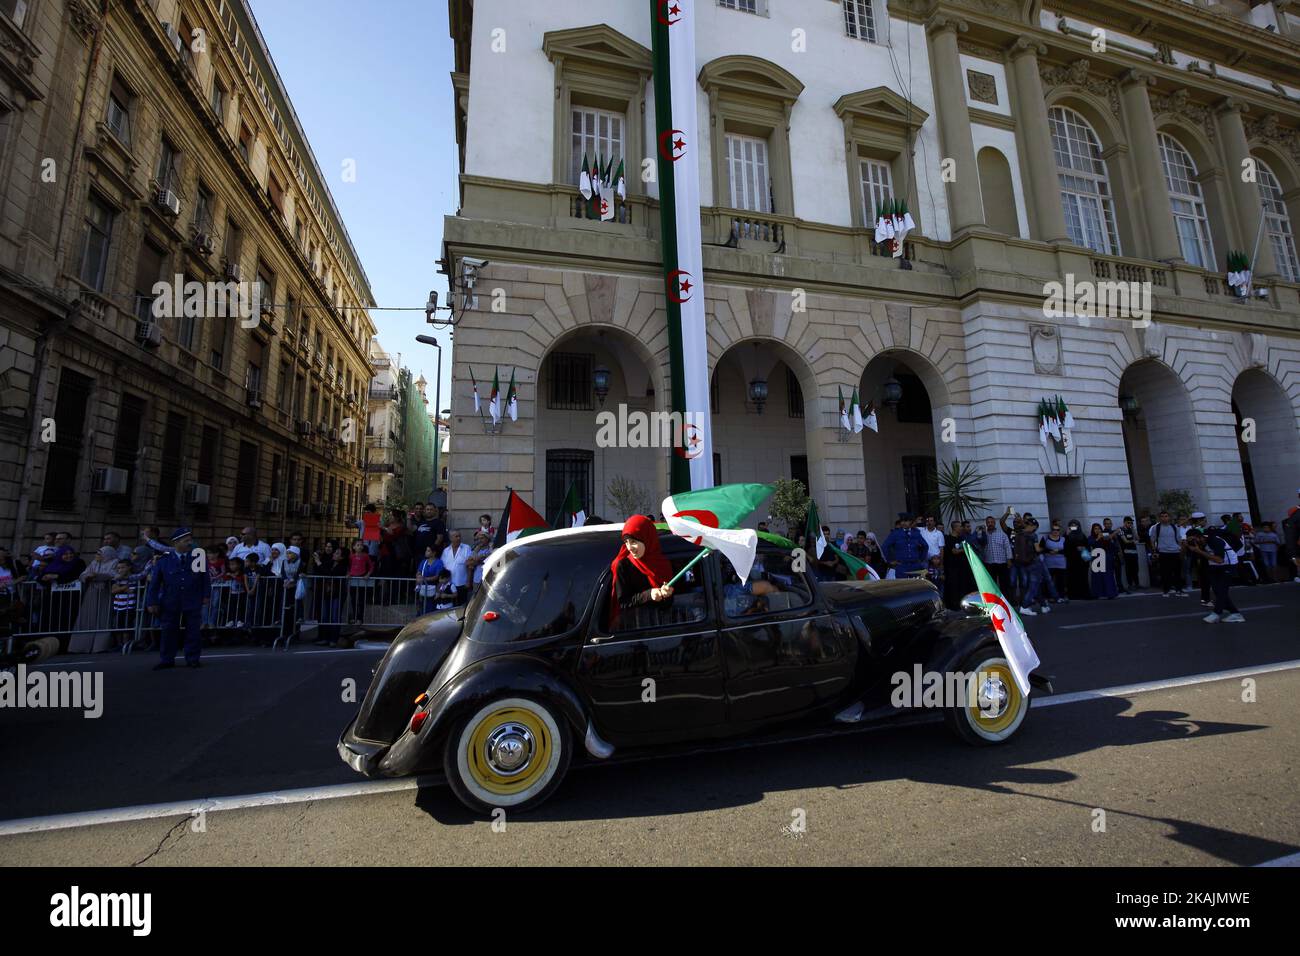 Celebrations parade of the 62th anniversary of the outbreak of the Revolution of November 1, 1954 in Algiers center, Algeria on 1st November 2016   Stock Photo